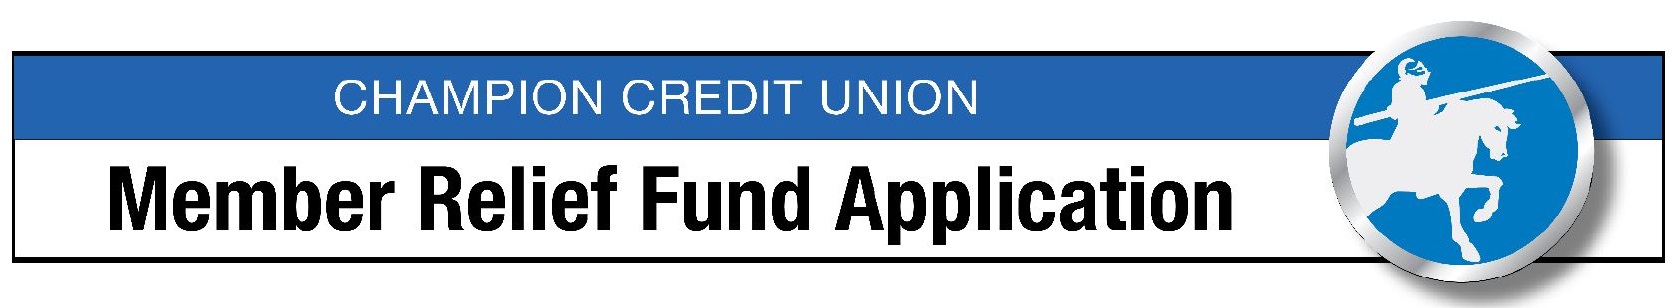 Champion Credit Union Member Relief Fund Application